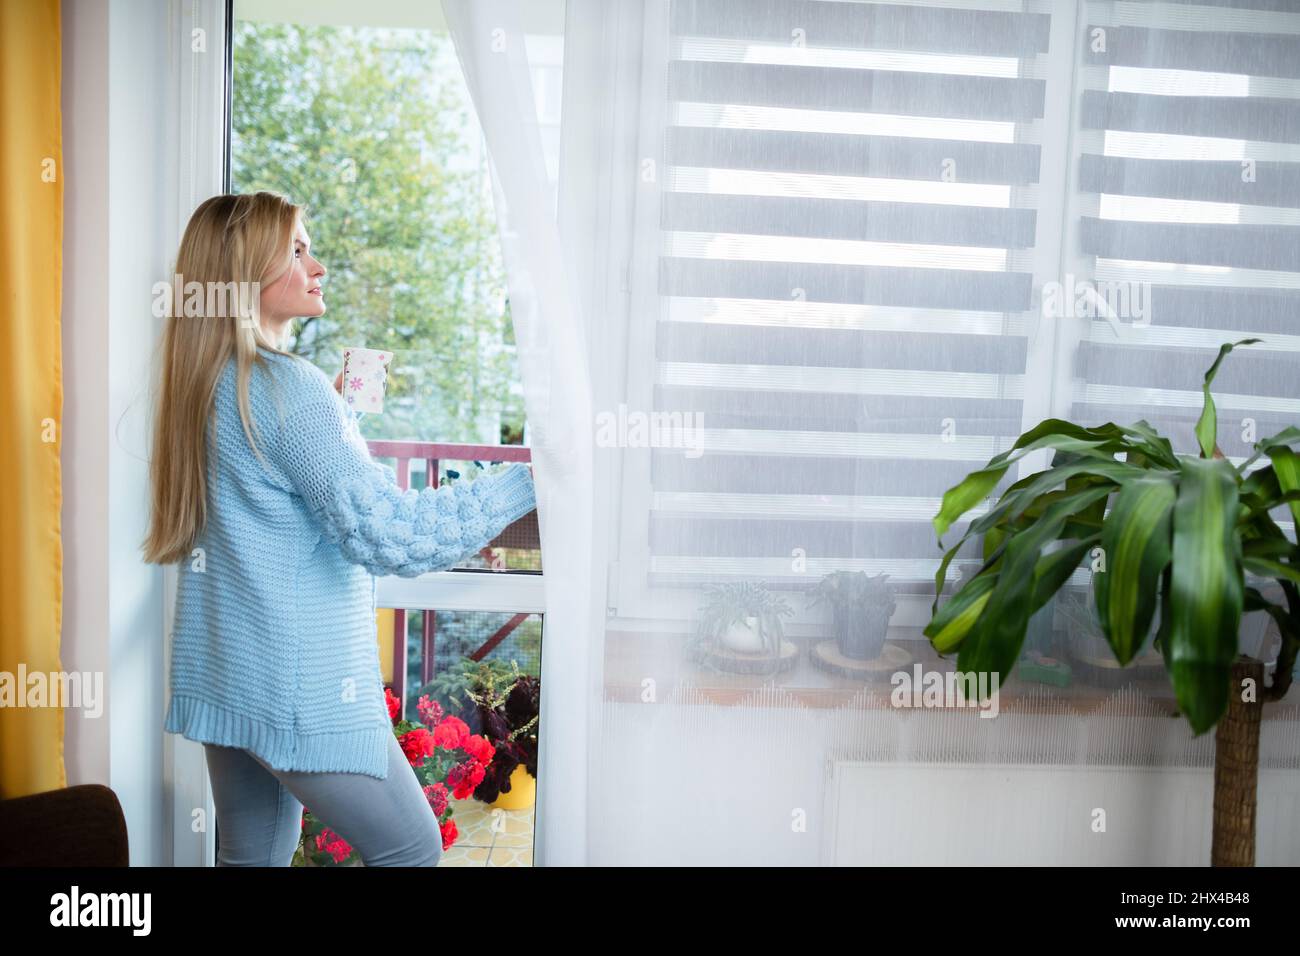 The girl looks outside through the window and her hands hold a cup. Stock Photo